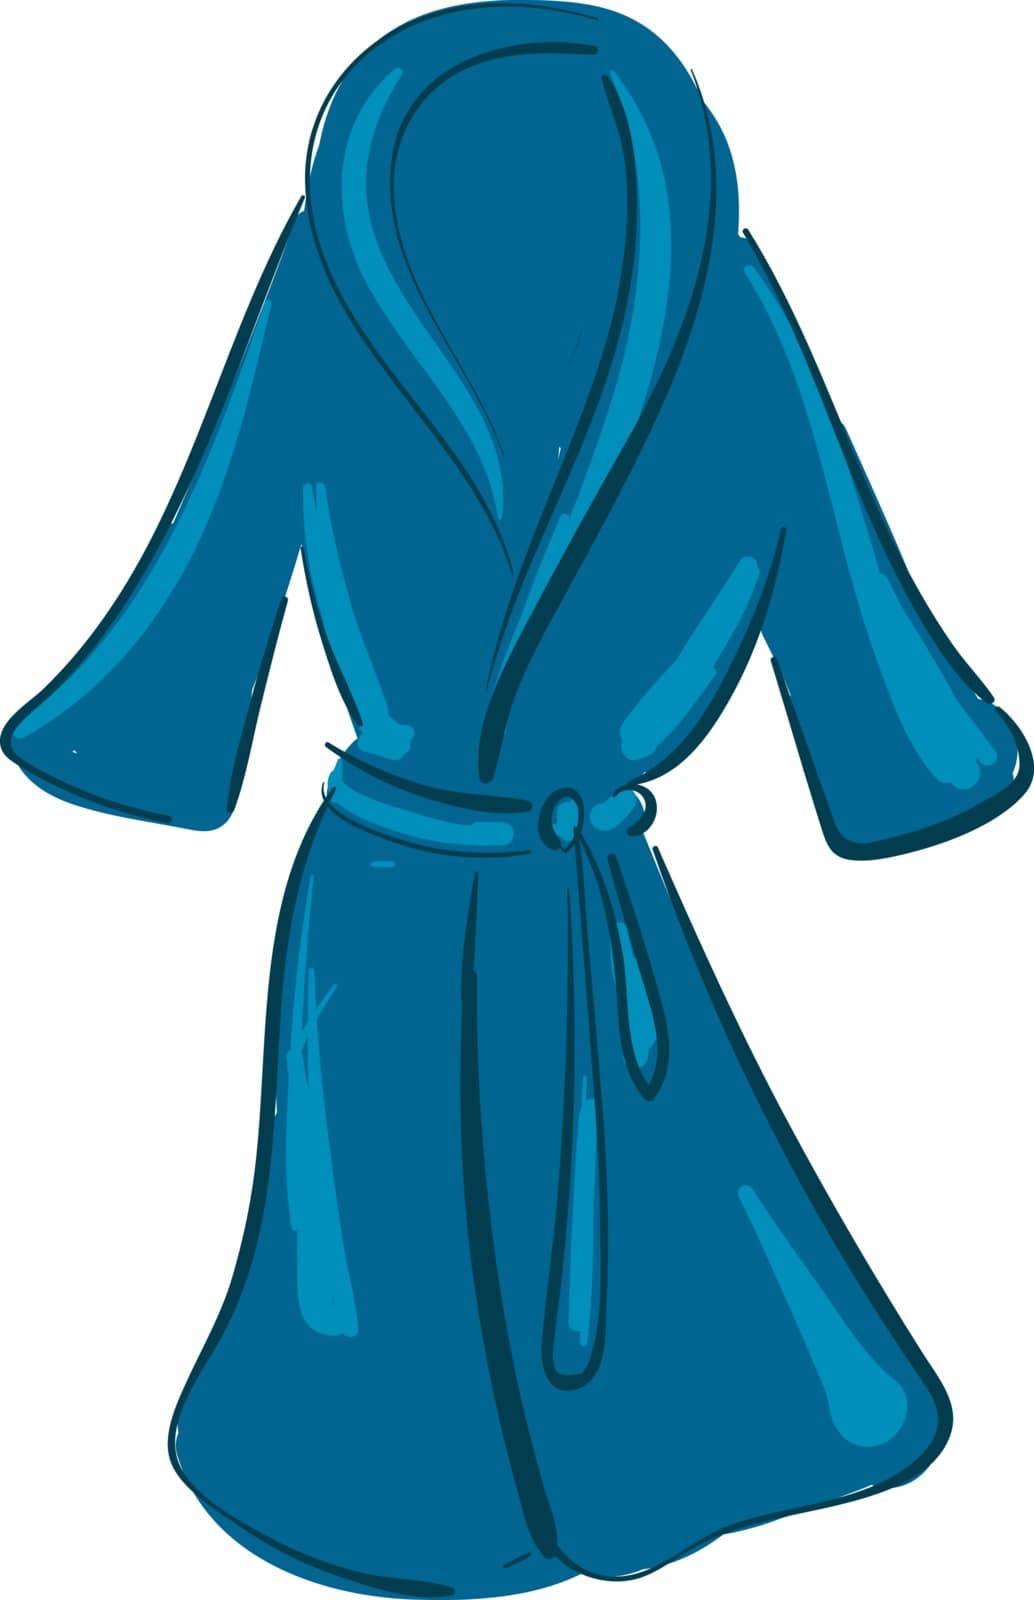 Clipart of a showcase blue-colored bathrobe with the belt loop at waist sides  contrast paneled piping and stitched detailing over the white background  vector  color drawing or illustration